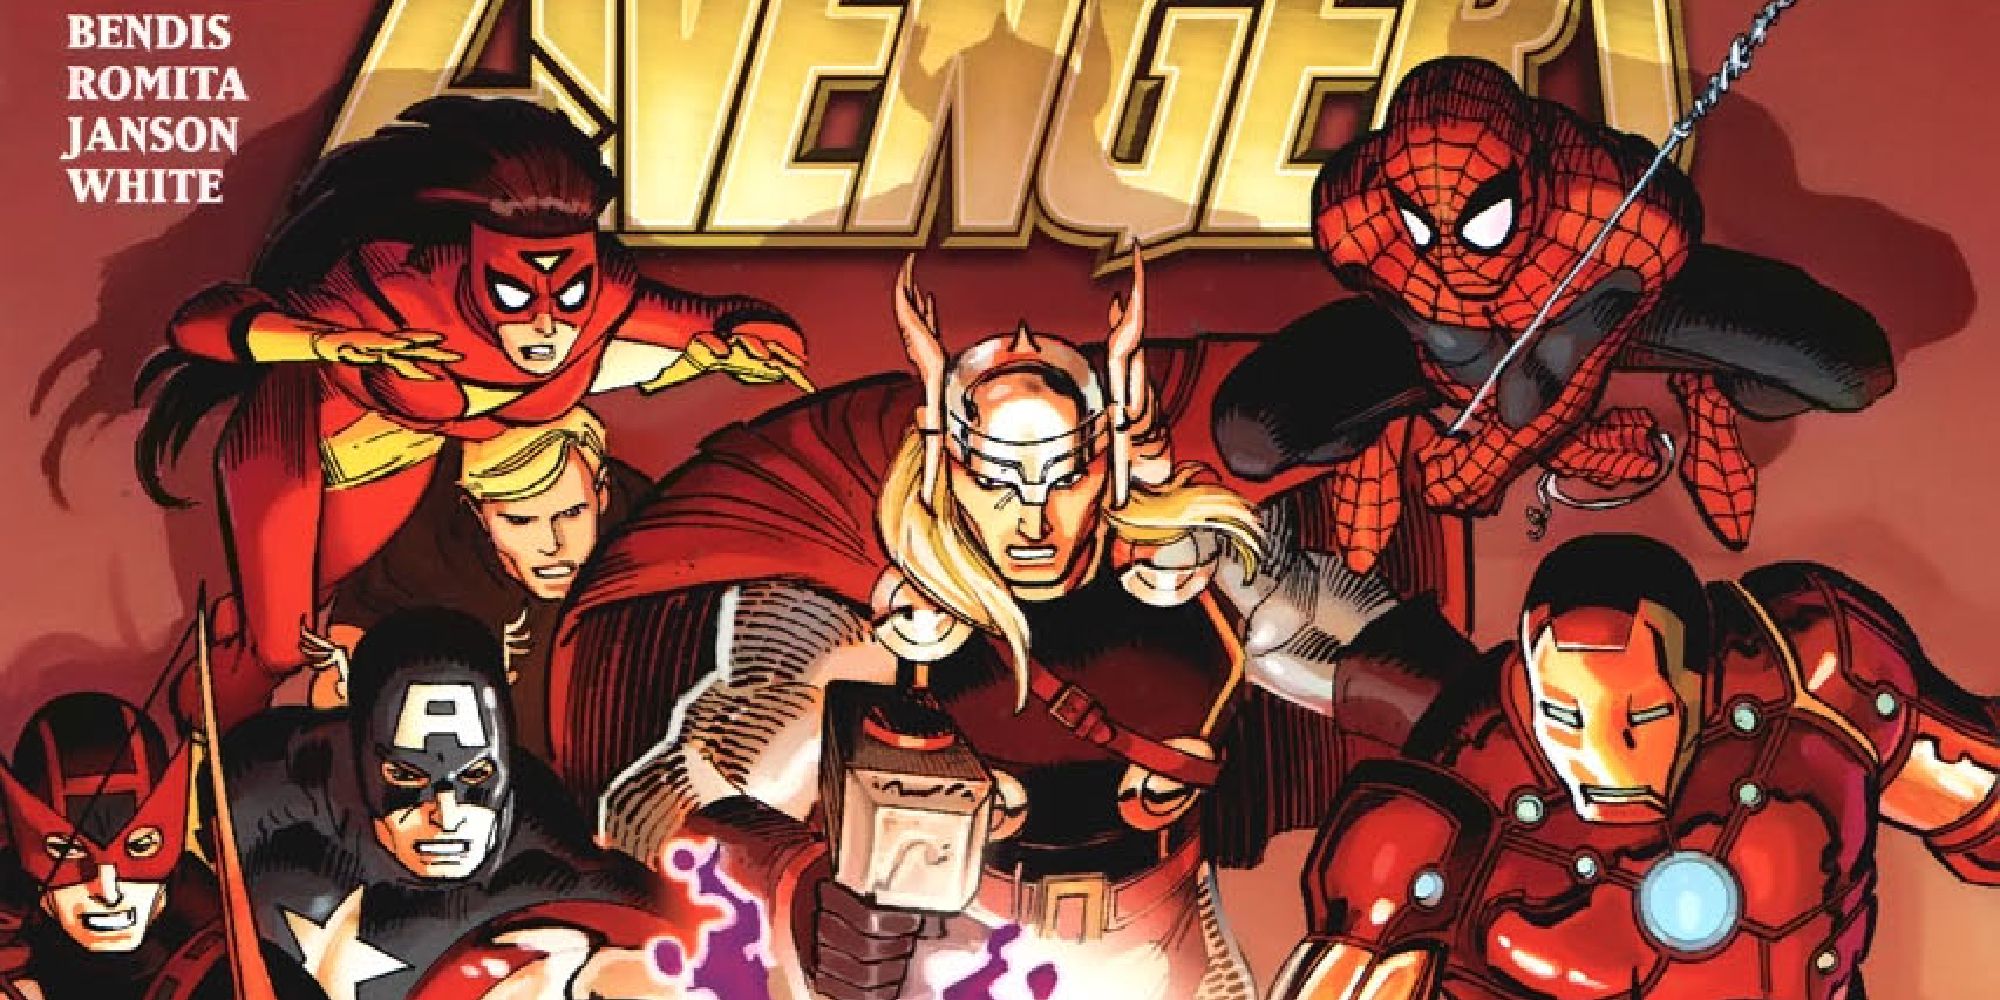 Avengers cover depicting Spider-Woman, Spider-Man, Thor, Captain America, Hawkeye, and Iron Man all looking at something off-page